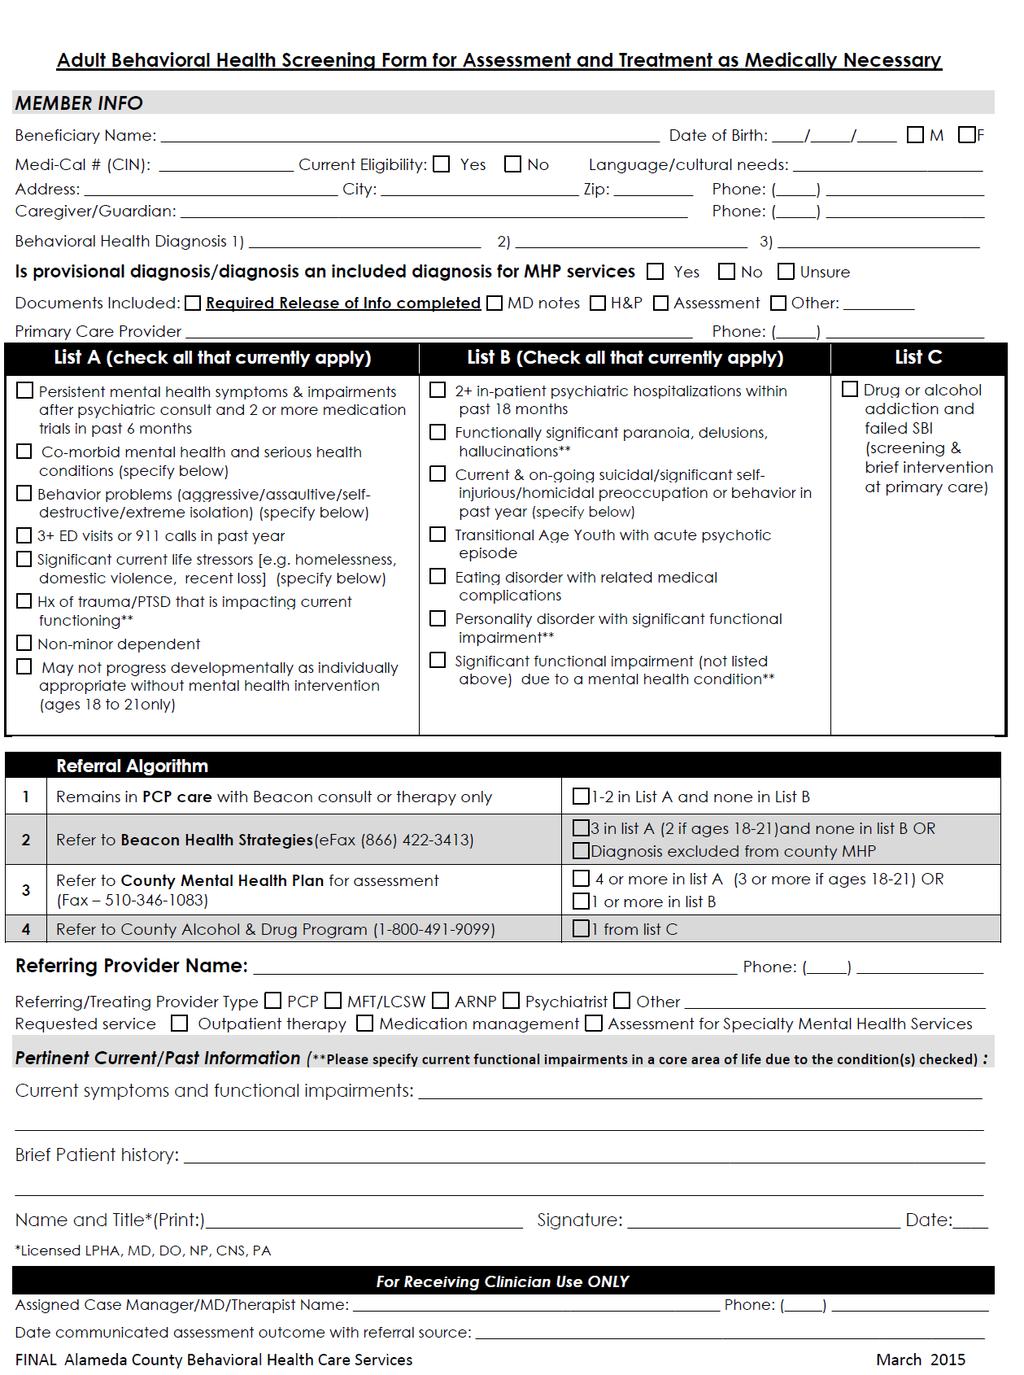 Integrated Sites: Using the Screening Form to Determine Level of Impairment Form Purpose: 1. All integrated sites must screen Medi- Cal members to ID appropriate payer source. 2.